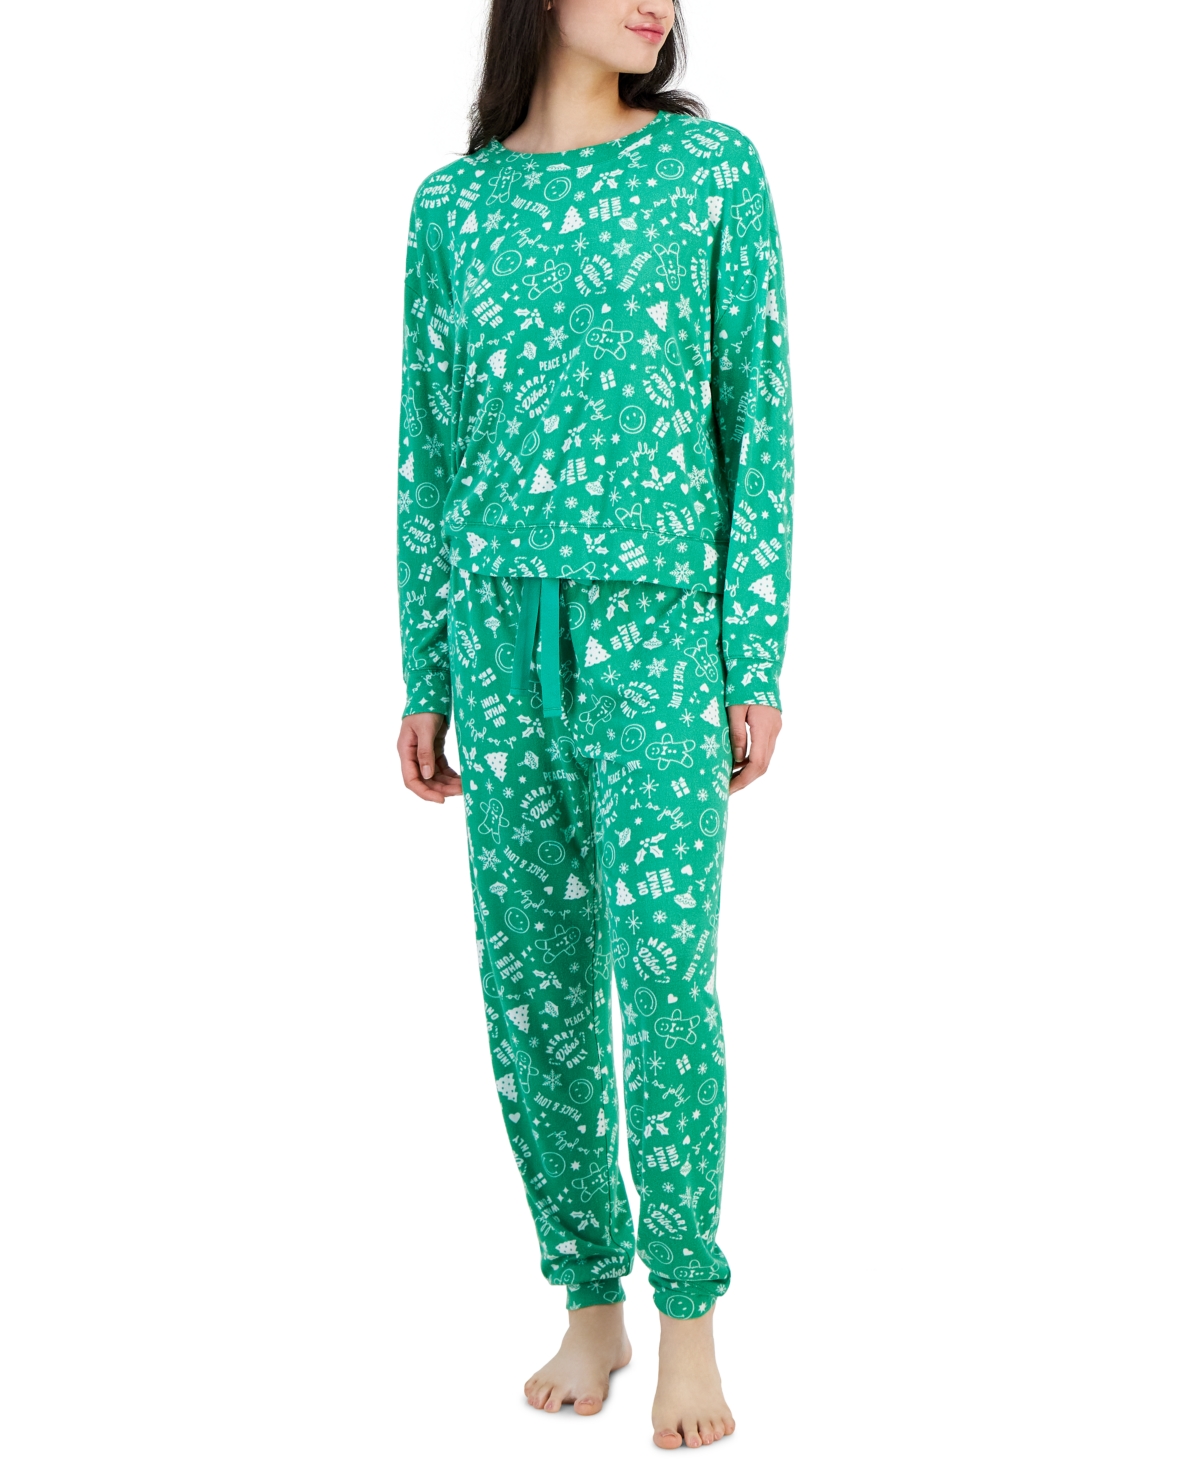 Women's 2-Pc. Long-Sleeve Packaged Pajamas Set, Created for Macy's - Doodle Holiday